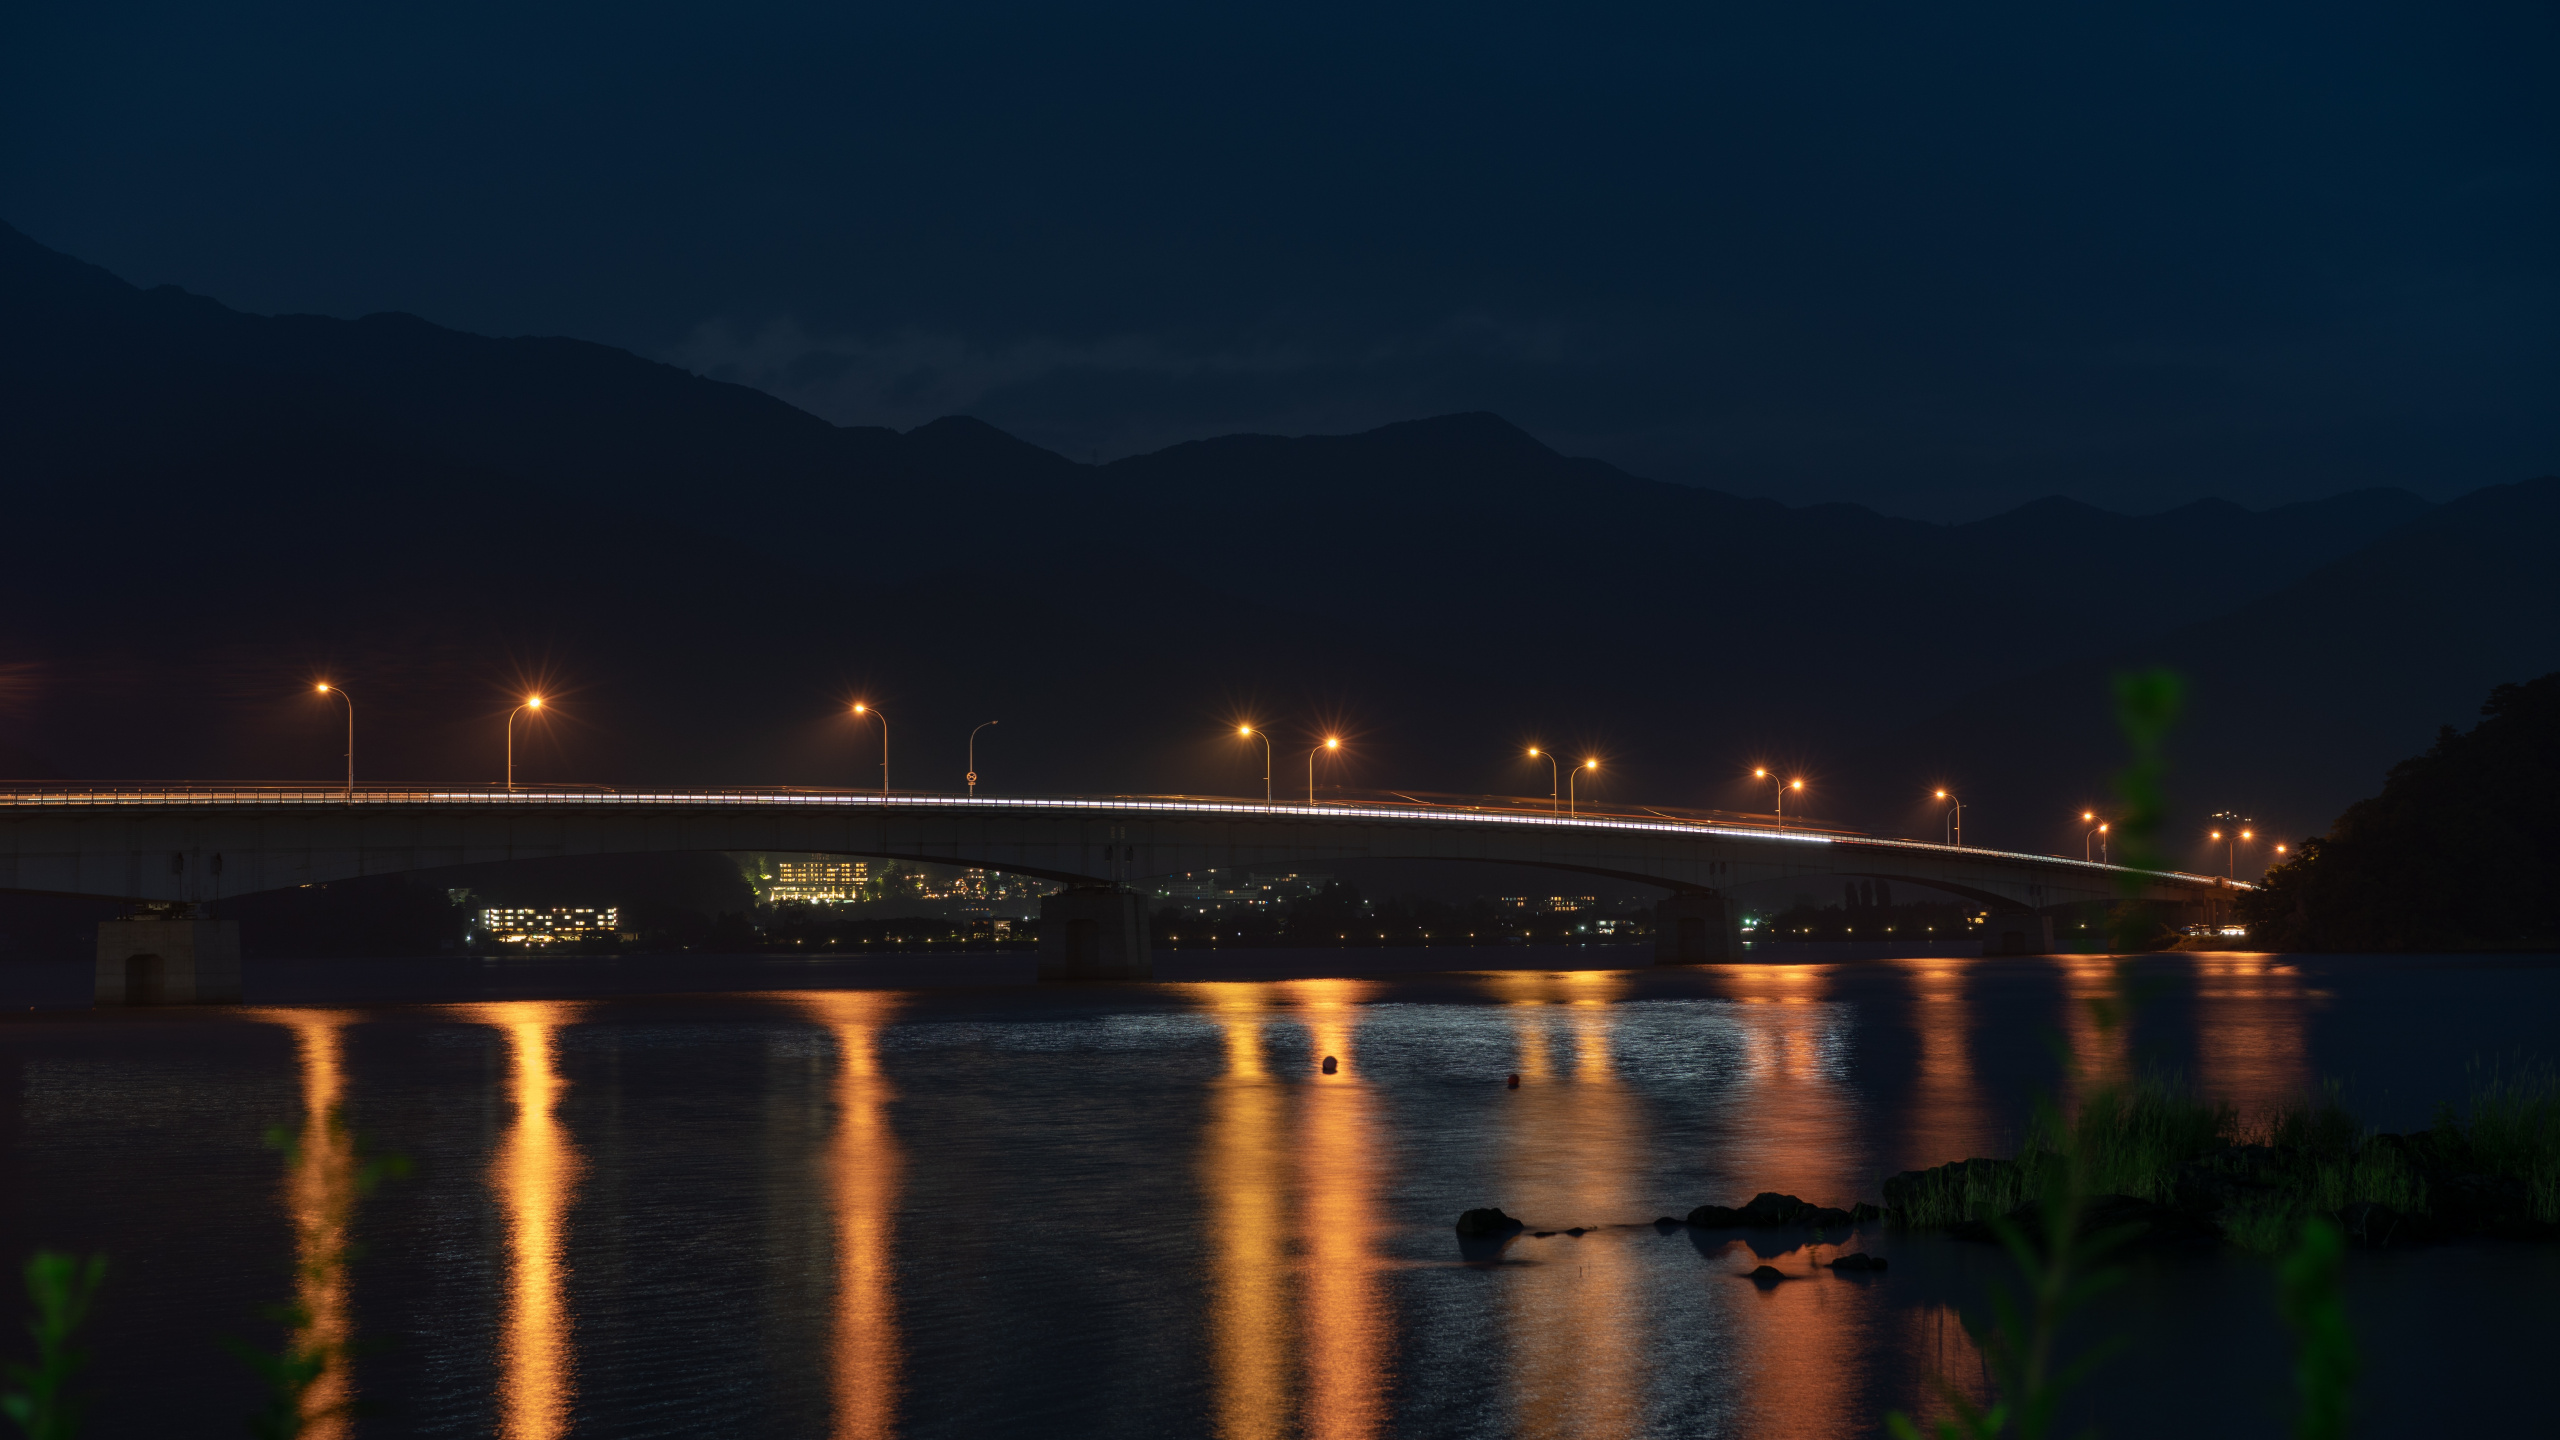 Lighted Bridge Over Water During Night Time. Wallpaper in 2560x1440 Resolution